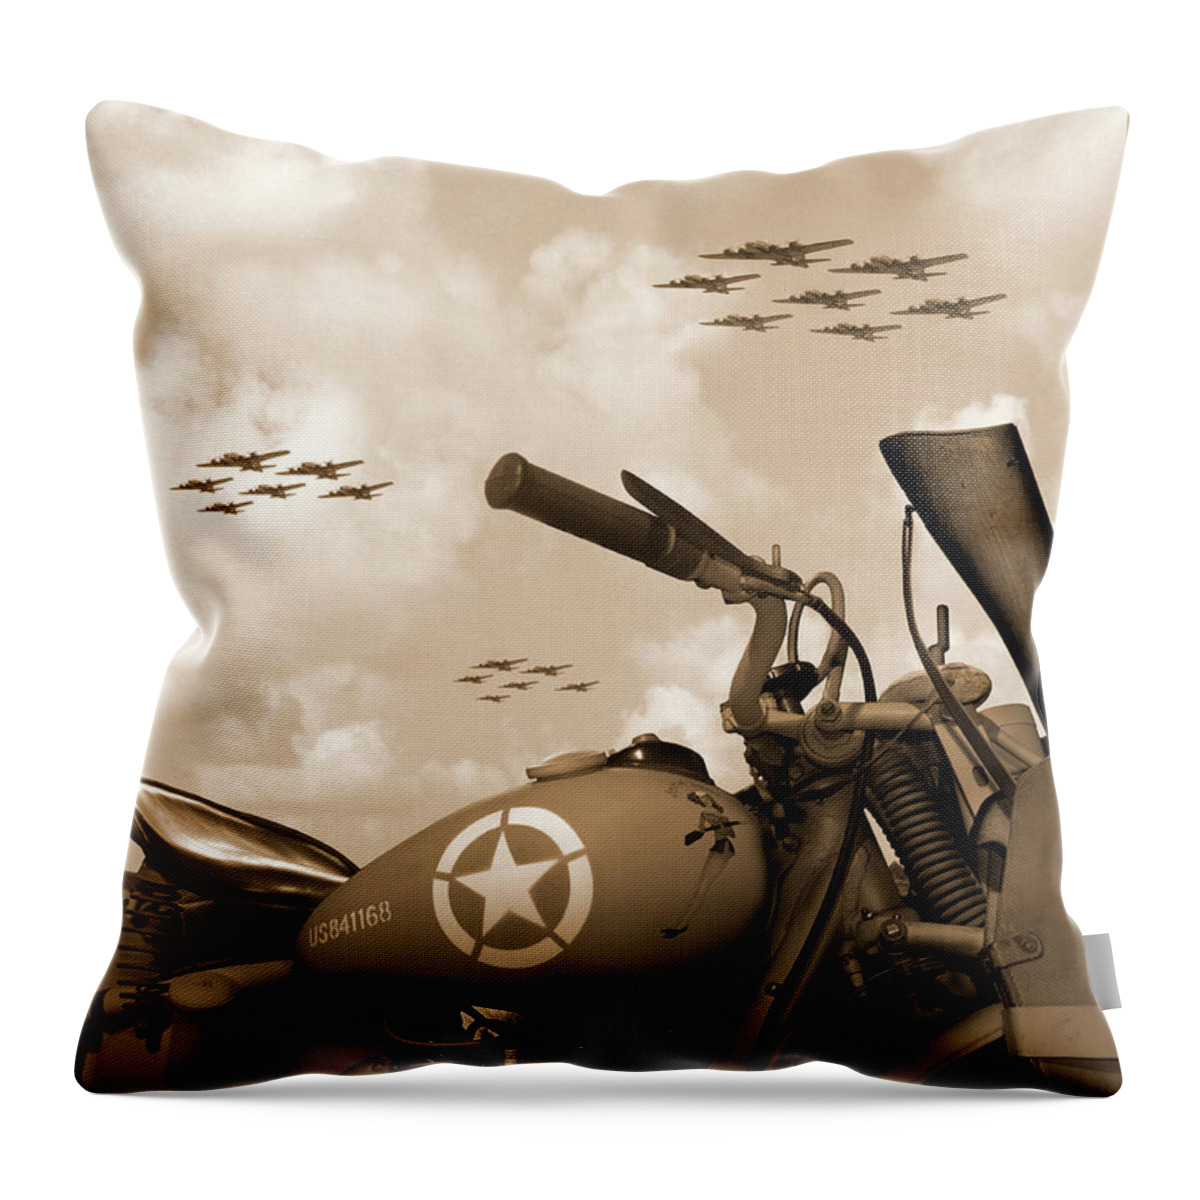 Warbirds Throw Pillow featuring the photograph 1942 Indian 841 - B-17 Flying Fortress' by Mike McGlothlen